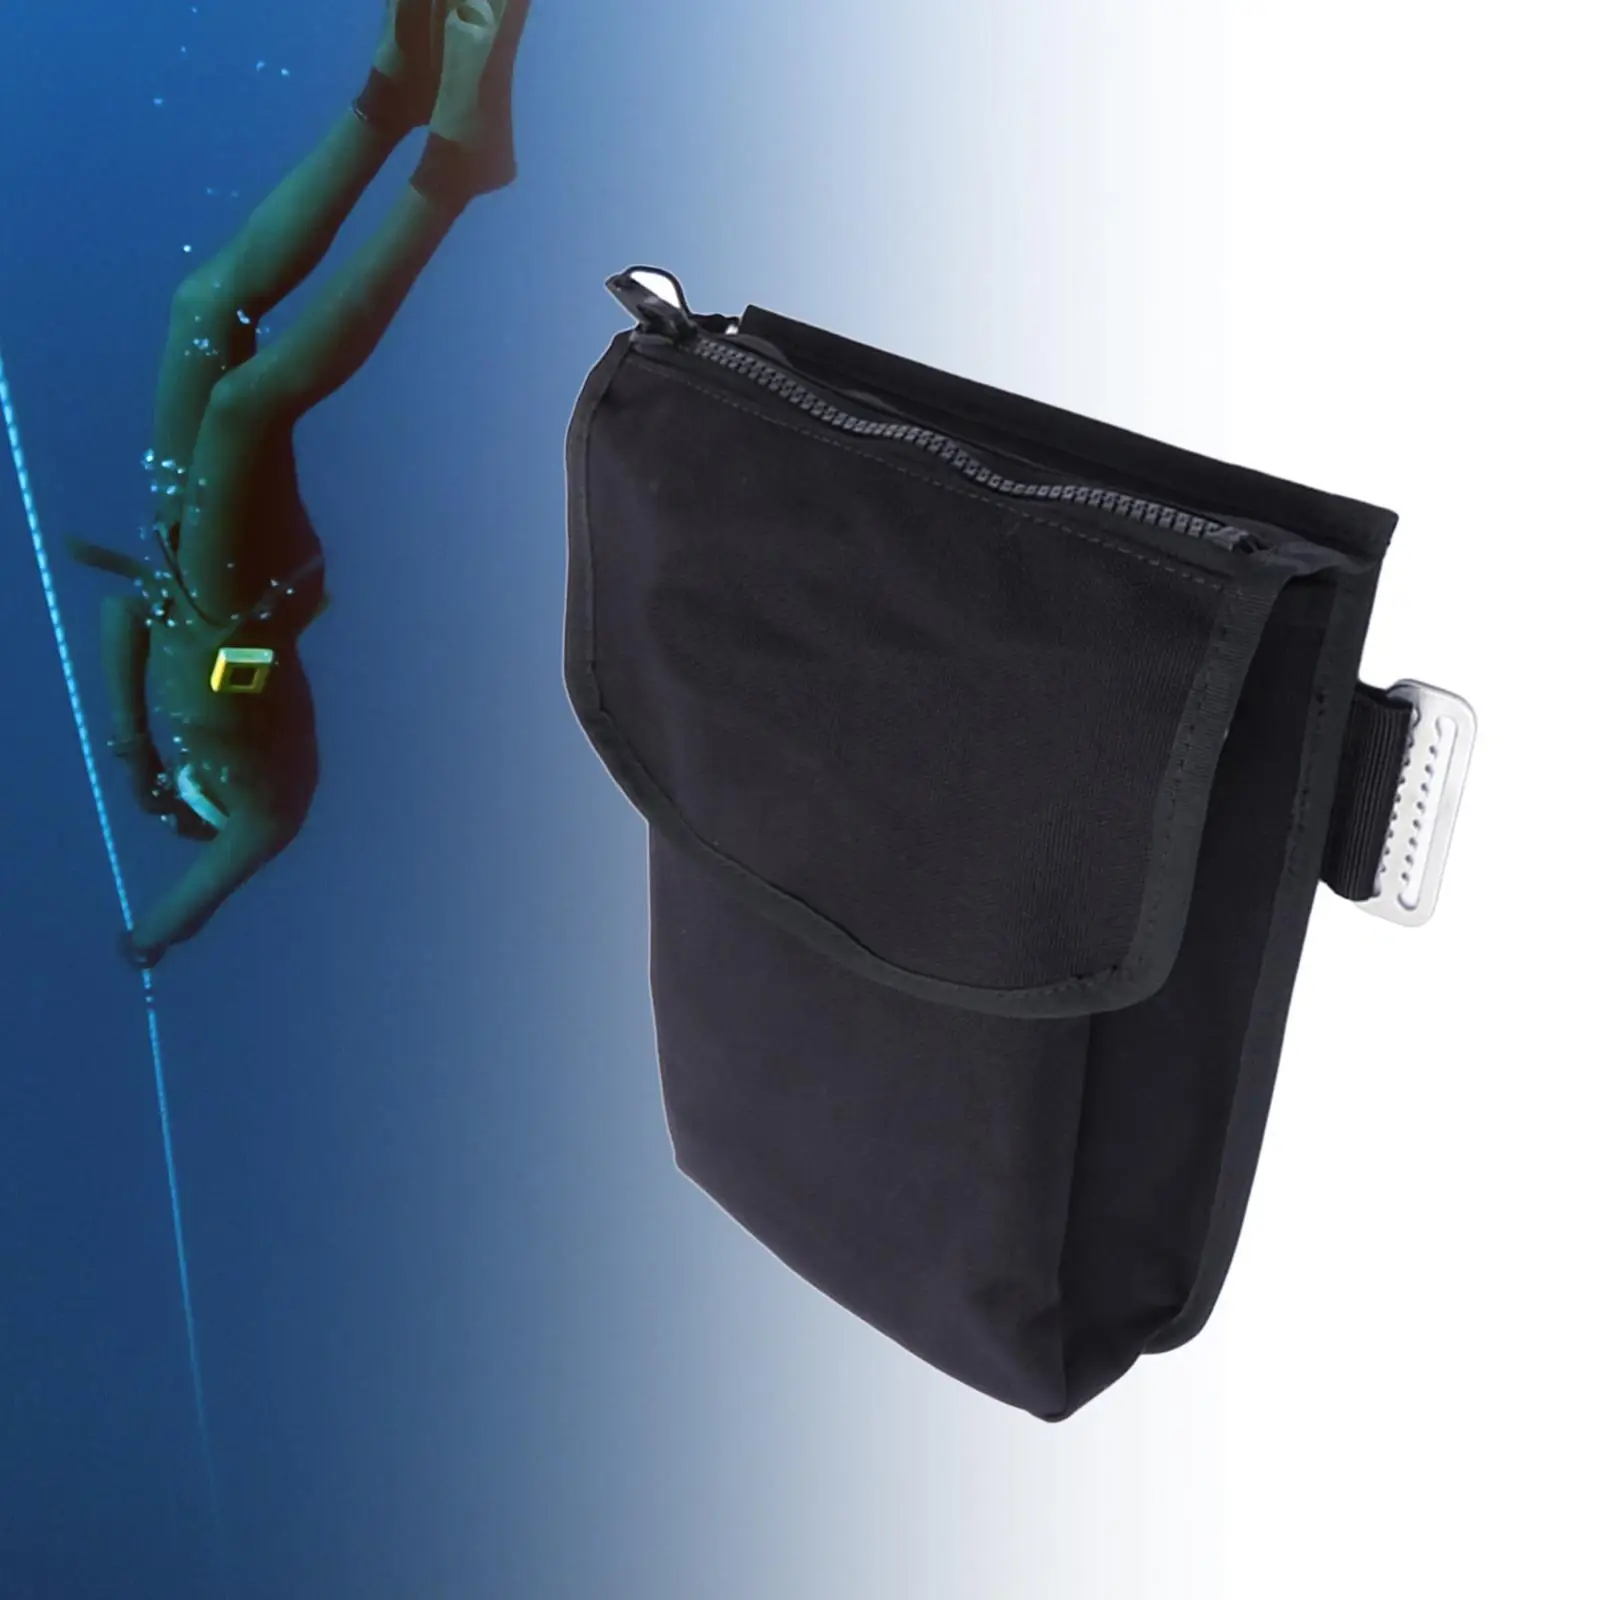 Scuba Diving Thigh Pocket Weight Pocket Technical Diving Carrying Bag Scuba Diving Accessories Storage Bag for Swimming Diver